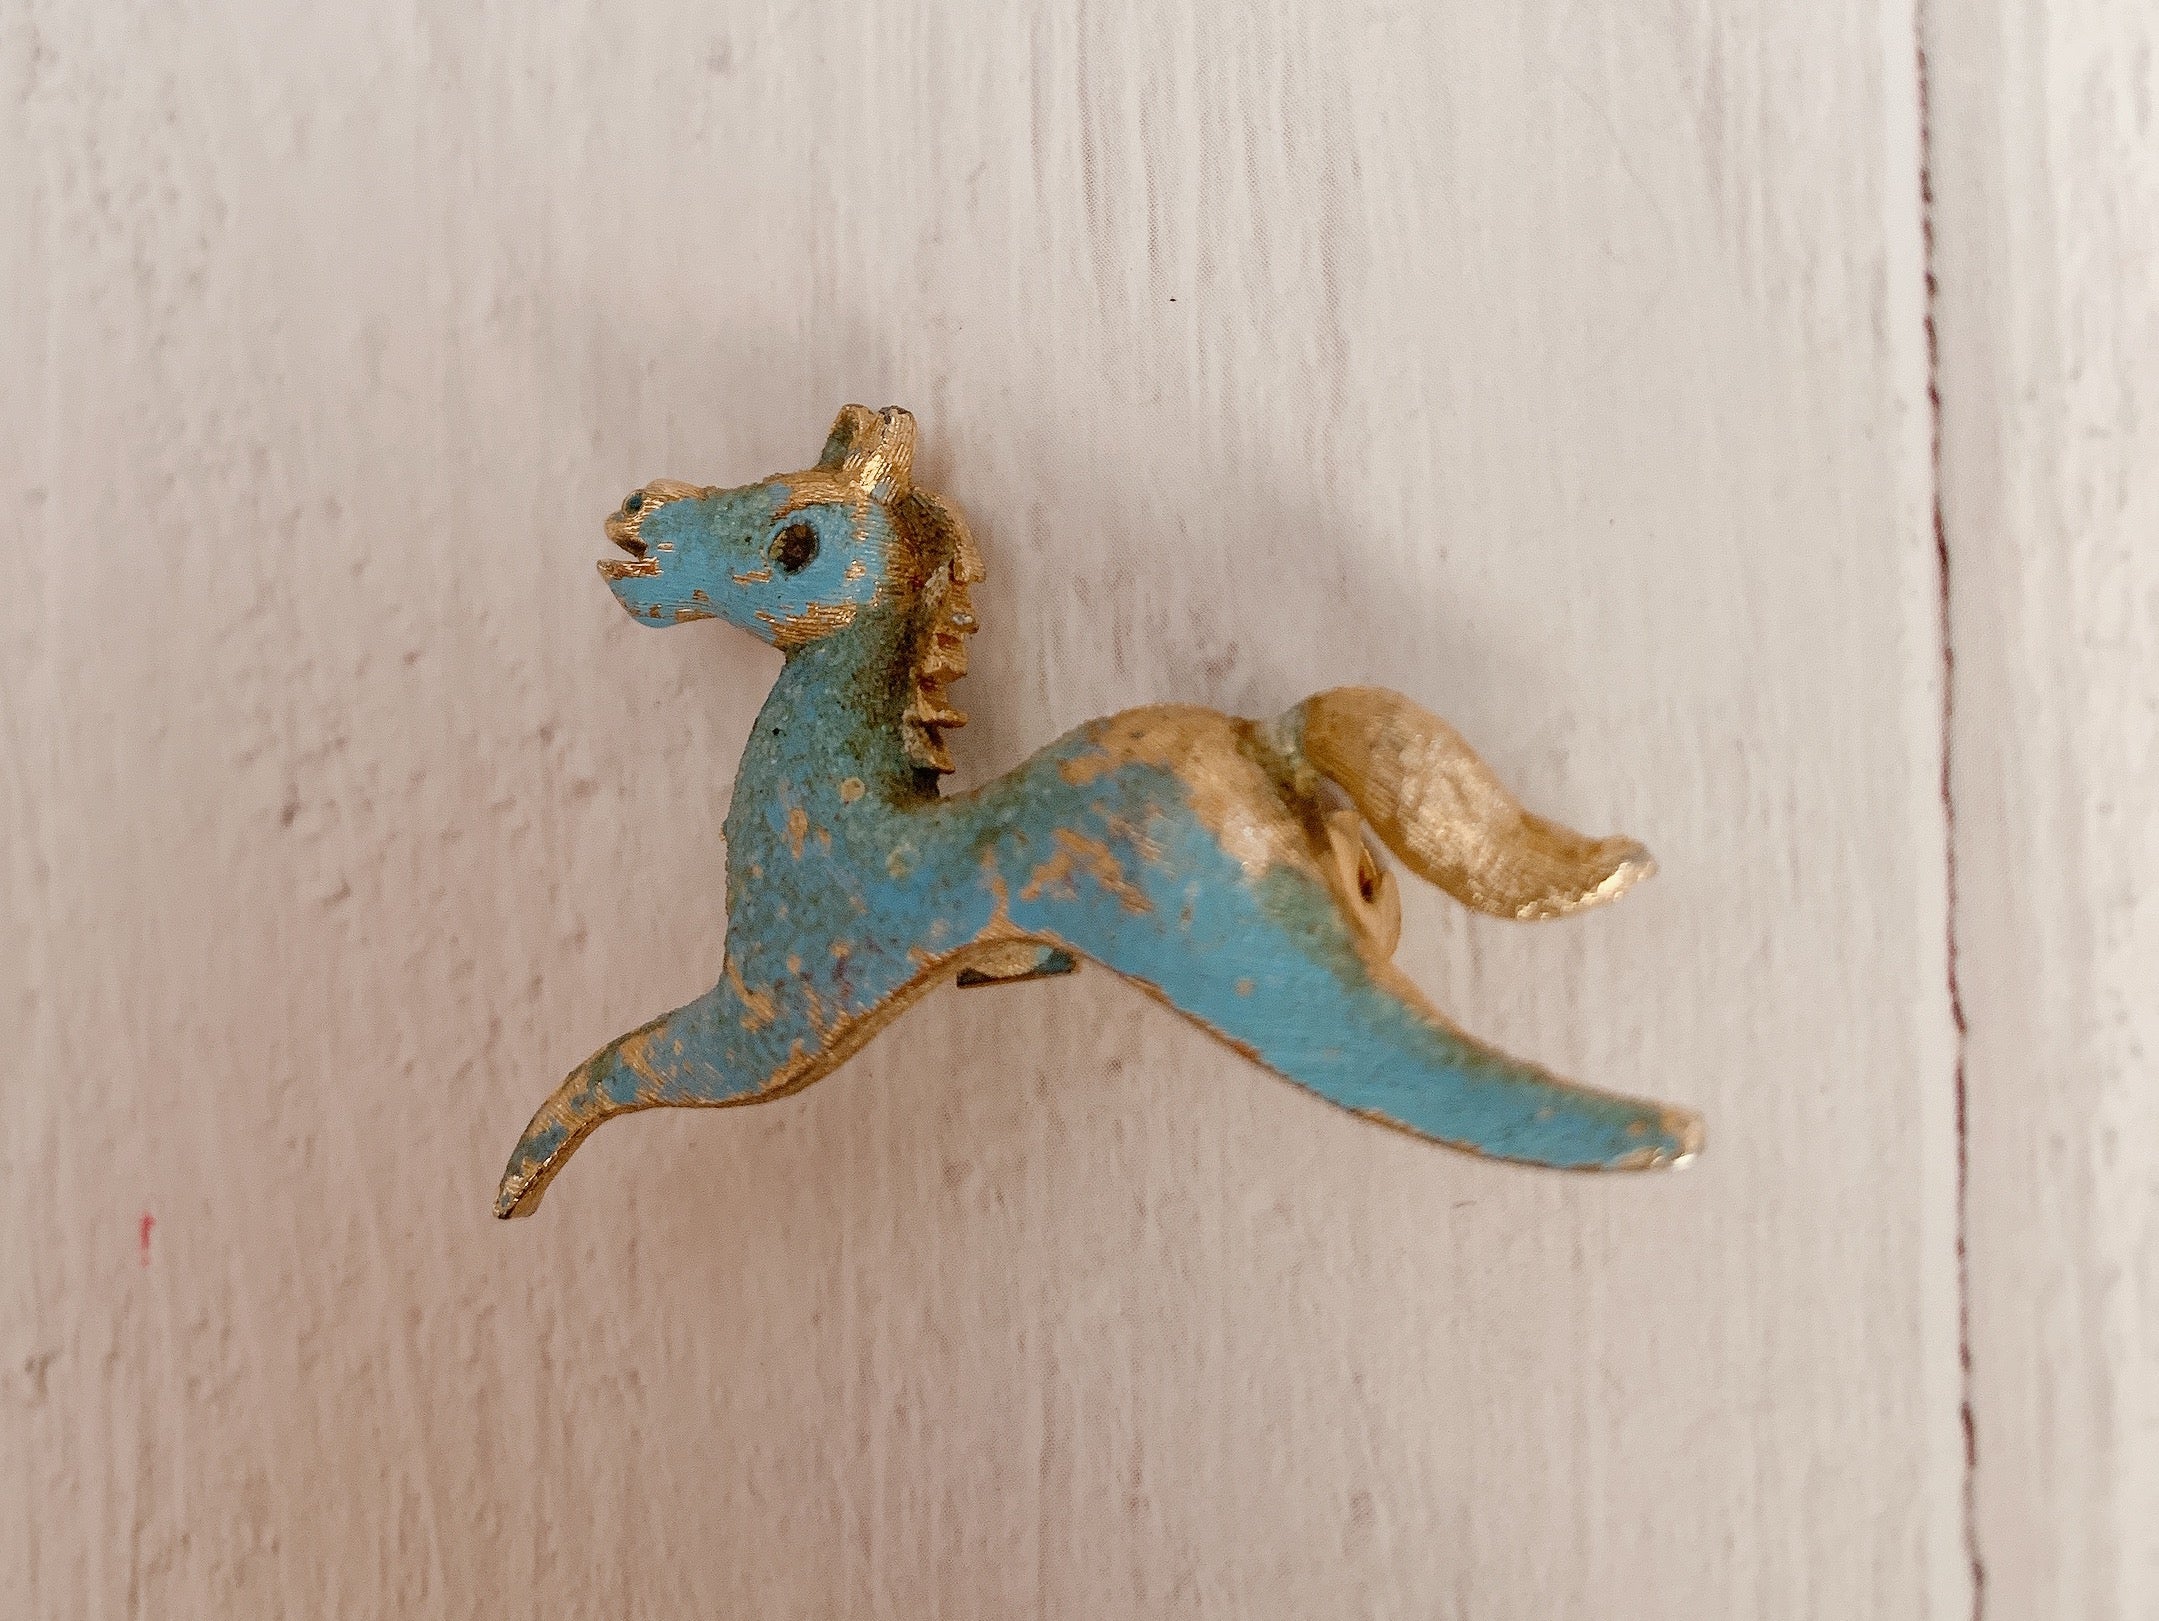 Vintage Mamselle Horse Pin